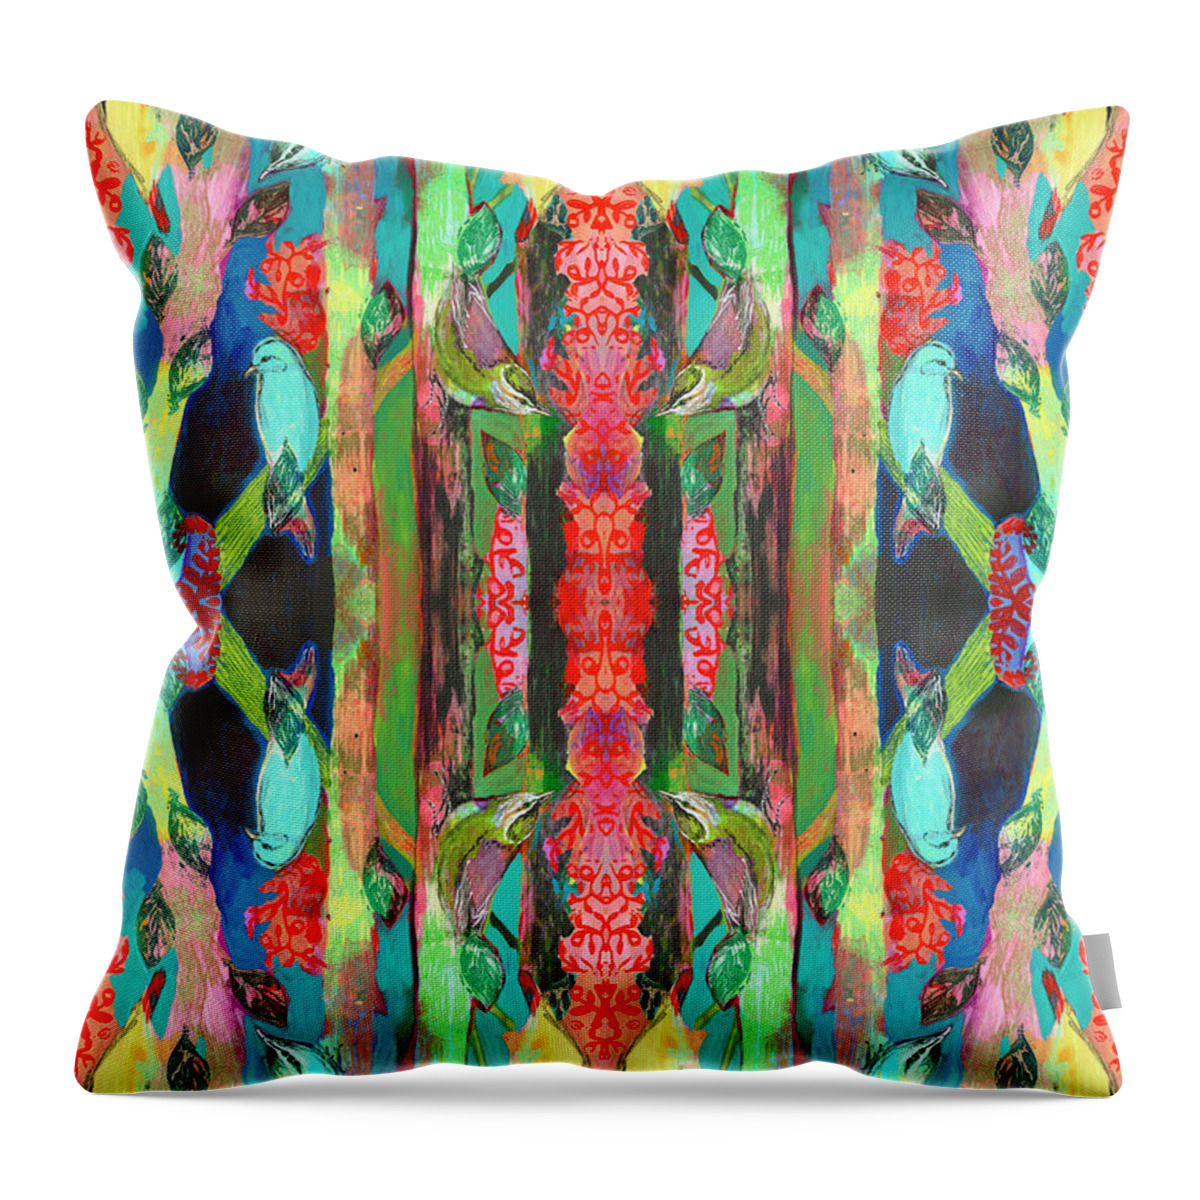 Nuthatch Throw Pillow featuring the digital art Nuthatch Forest Pattern by Jennifer Lommers